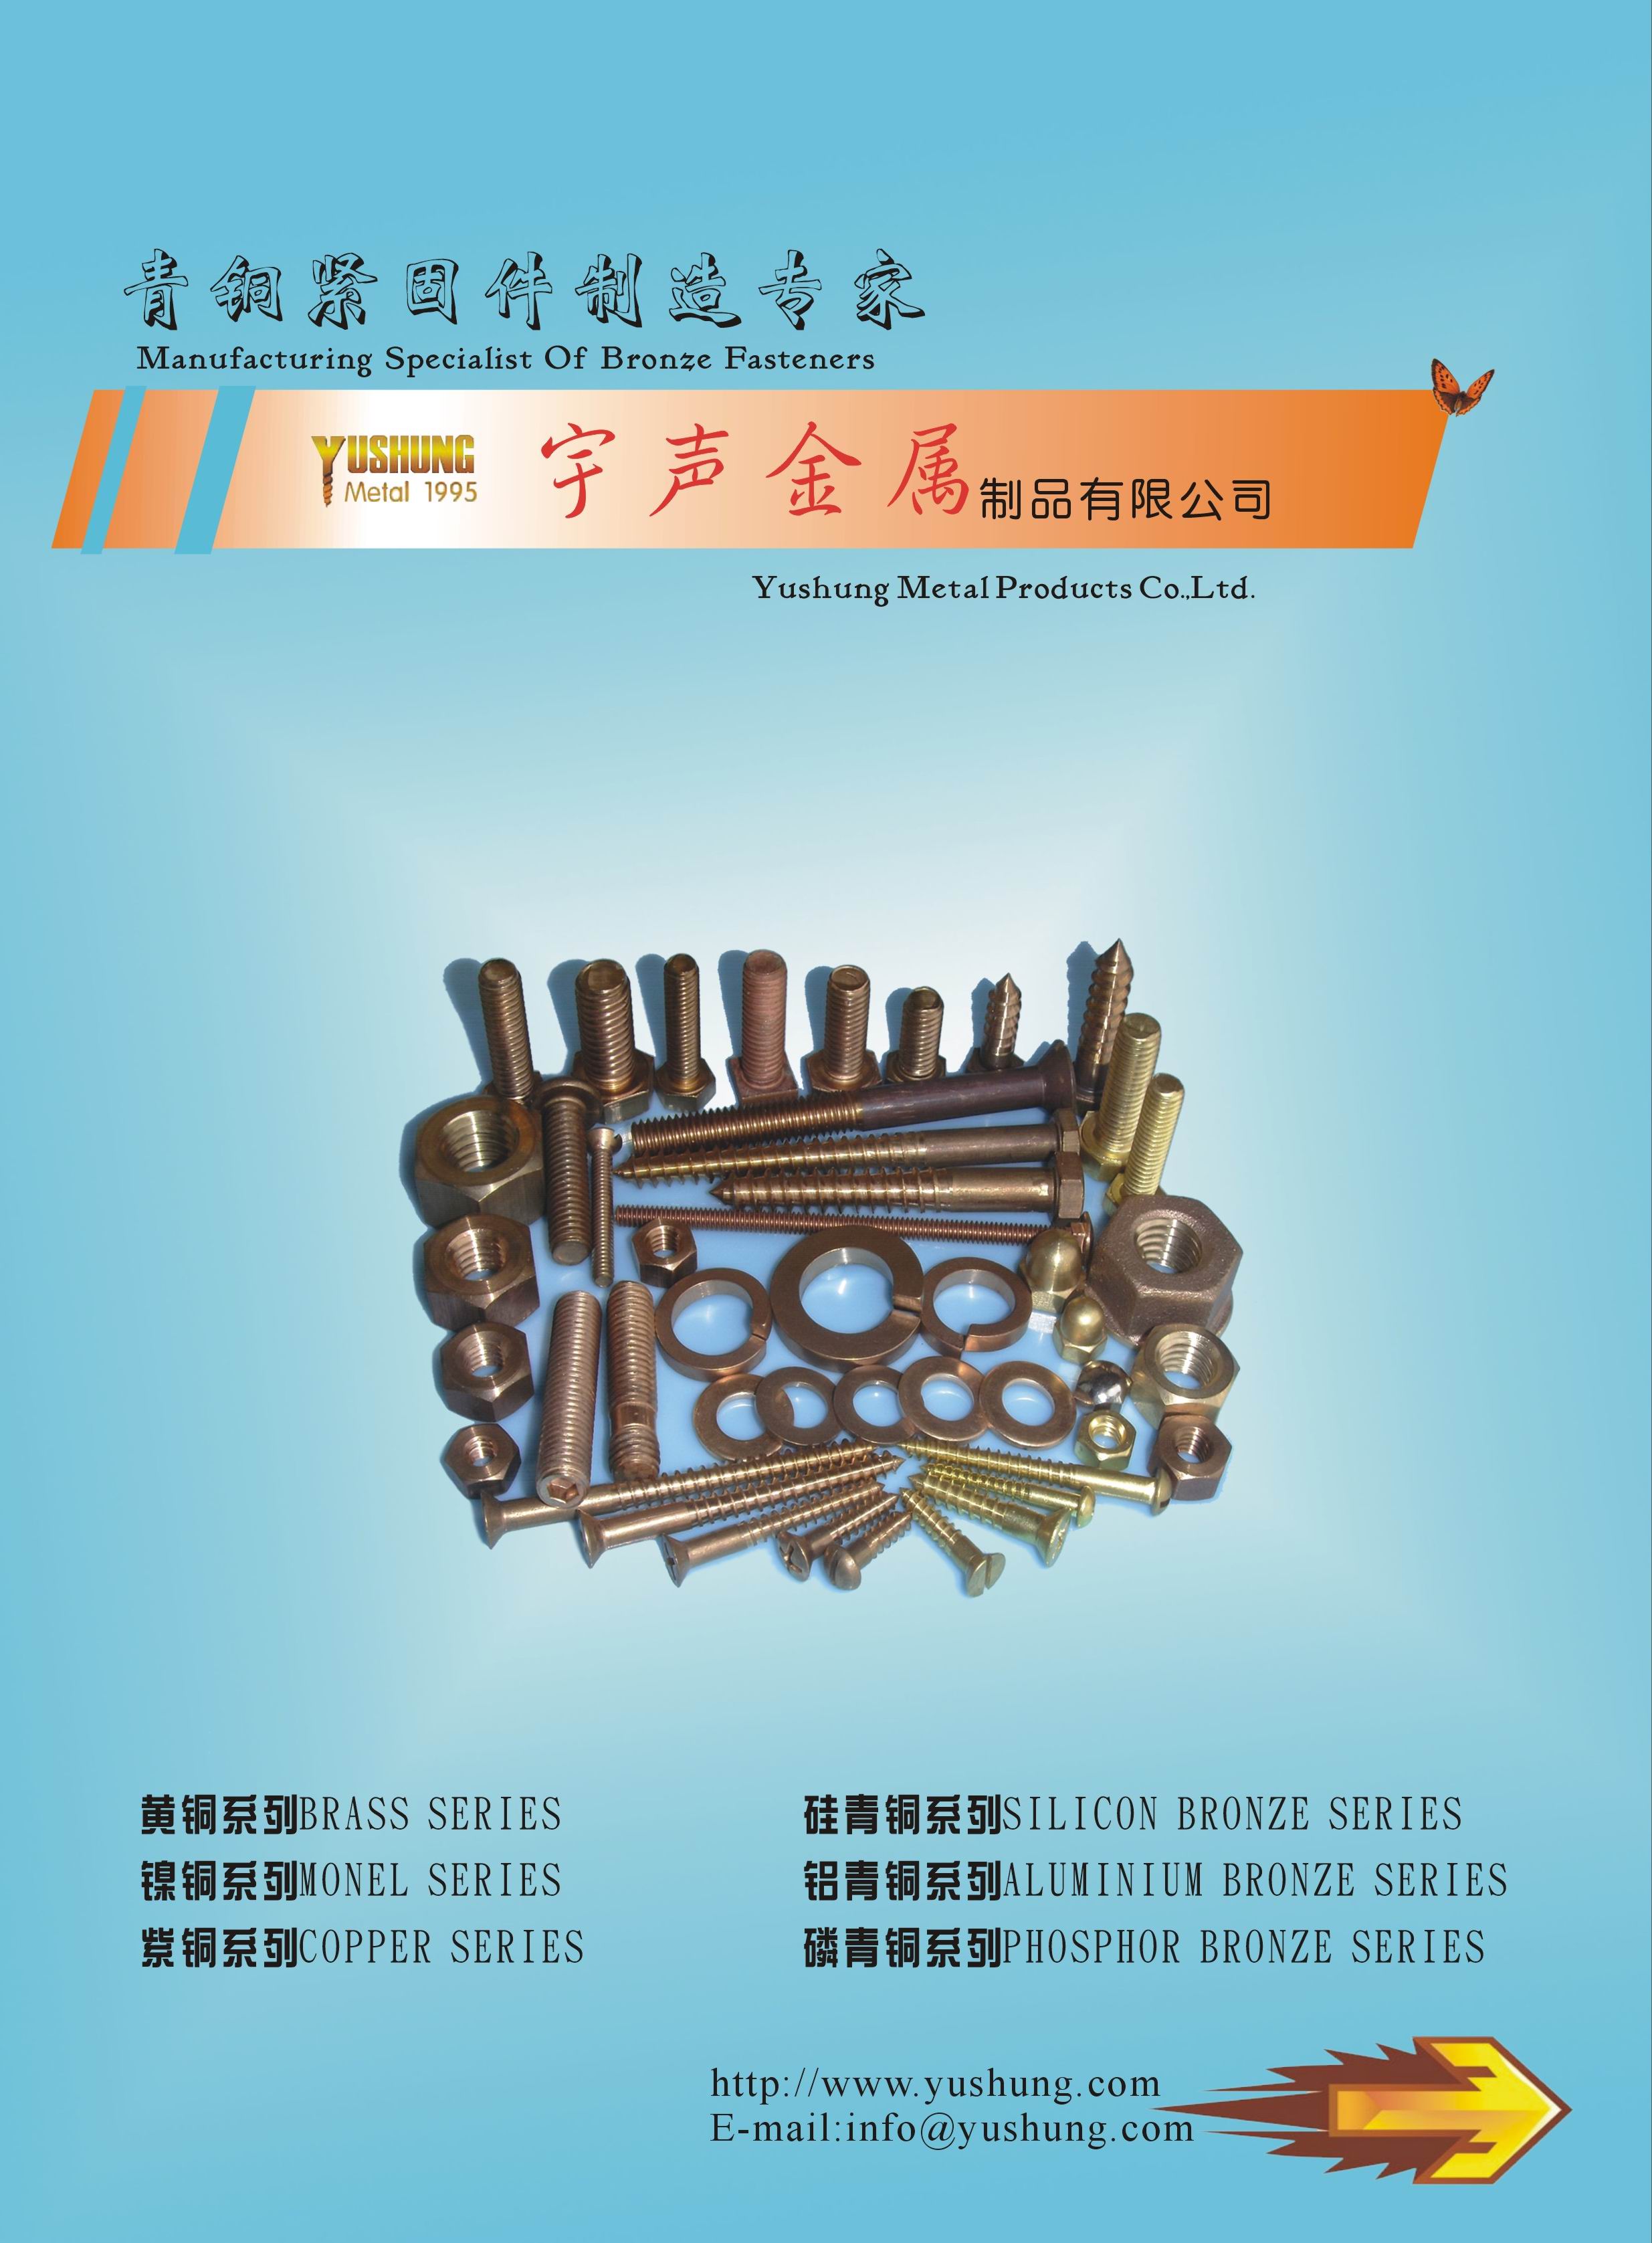 YUSHUNG METAL PRODUCTS CO., LTD._Online Catalogues